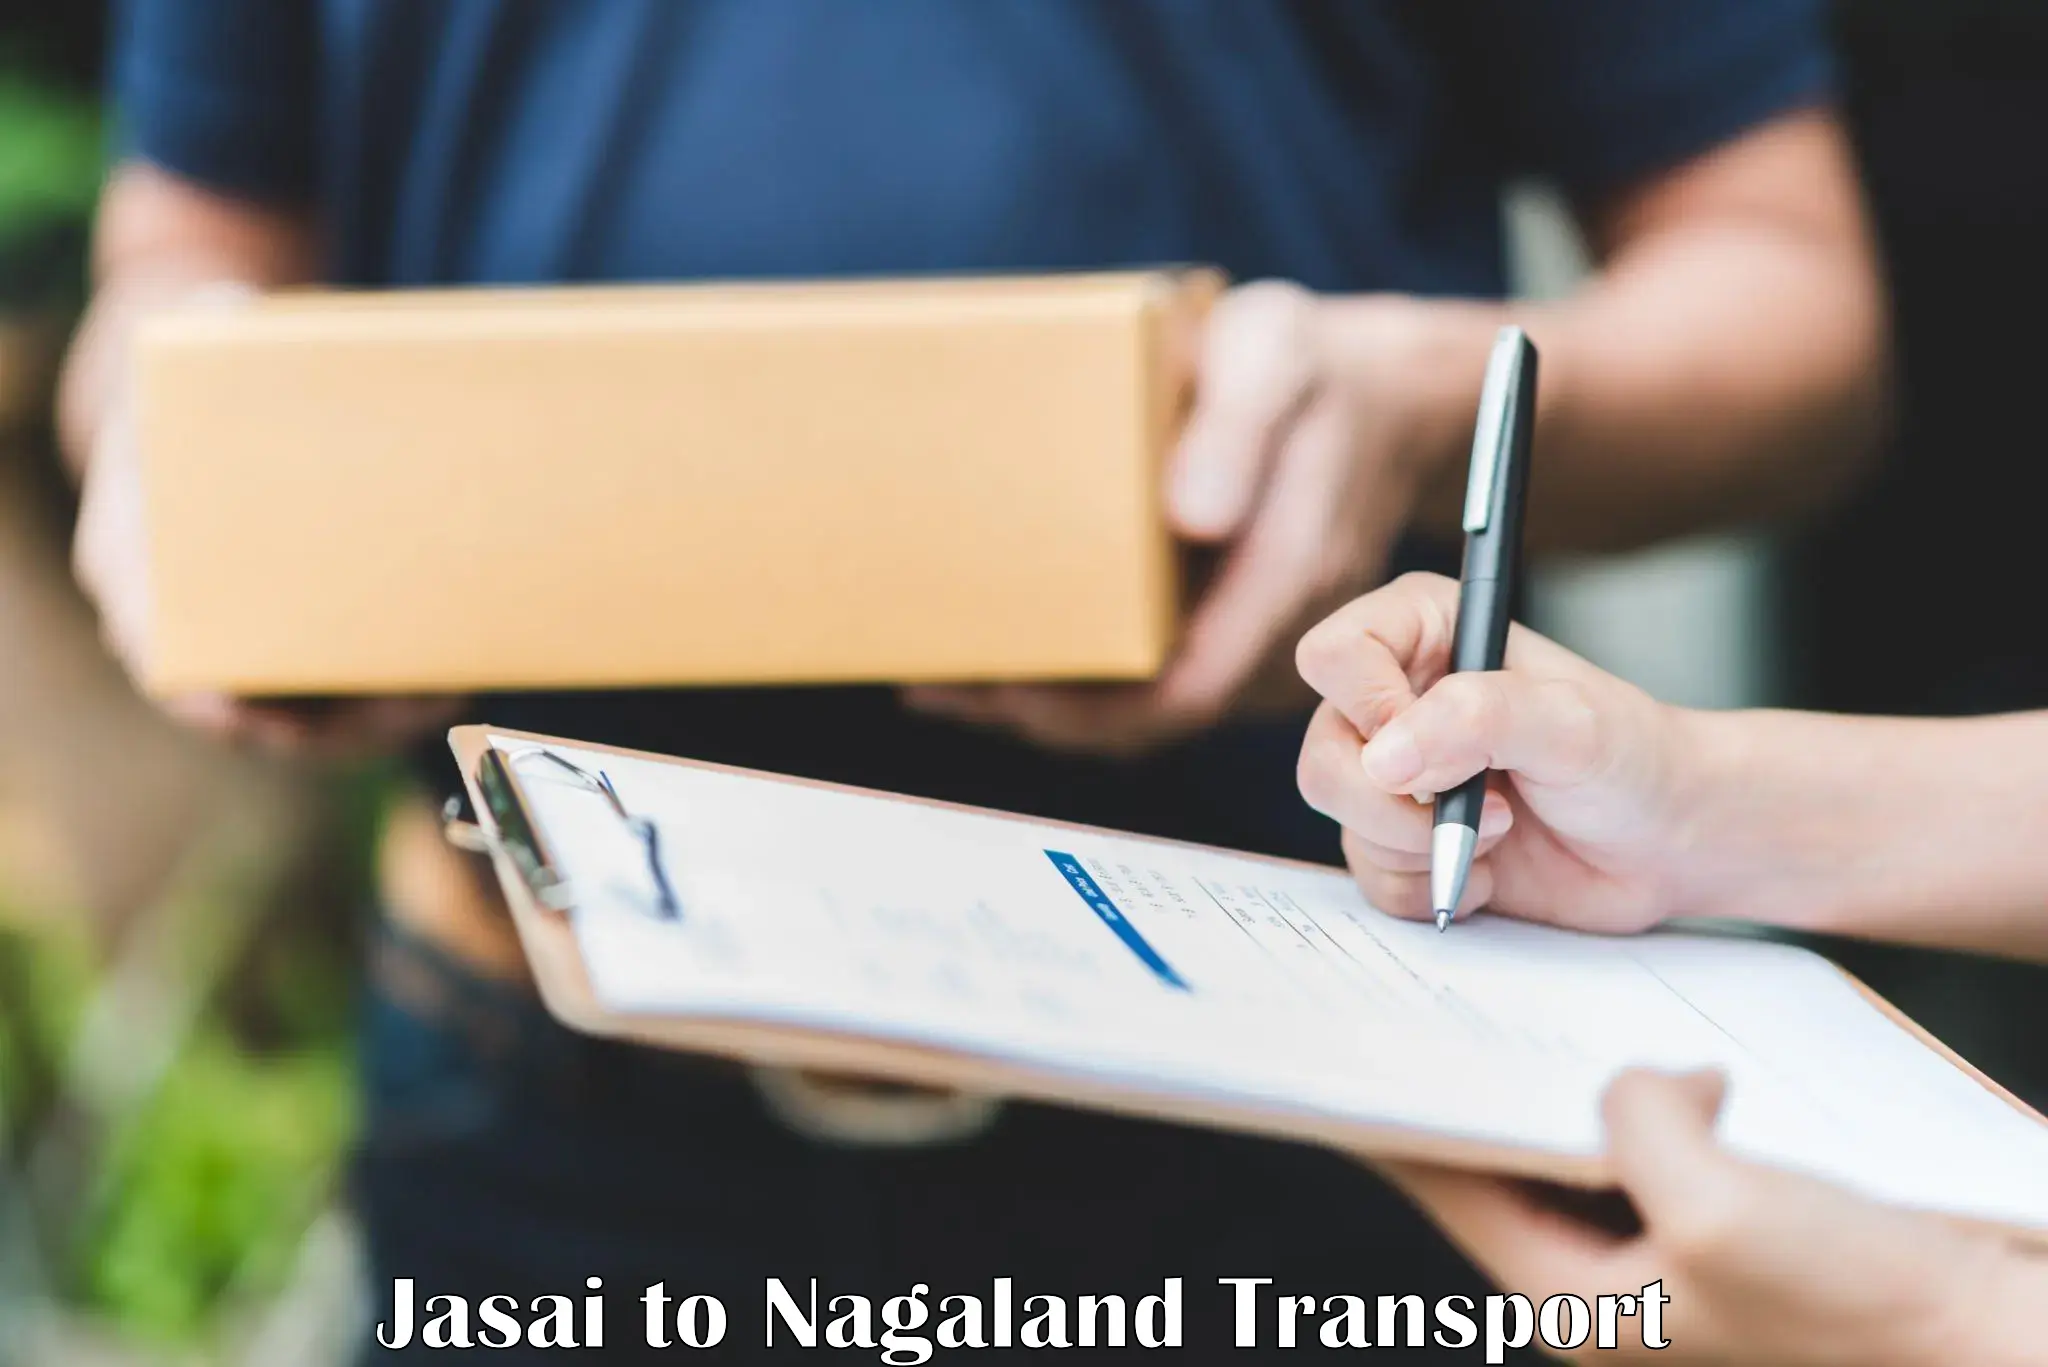 Container transport service Jasai to NIT Nagaland